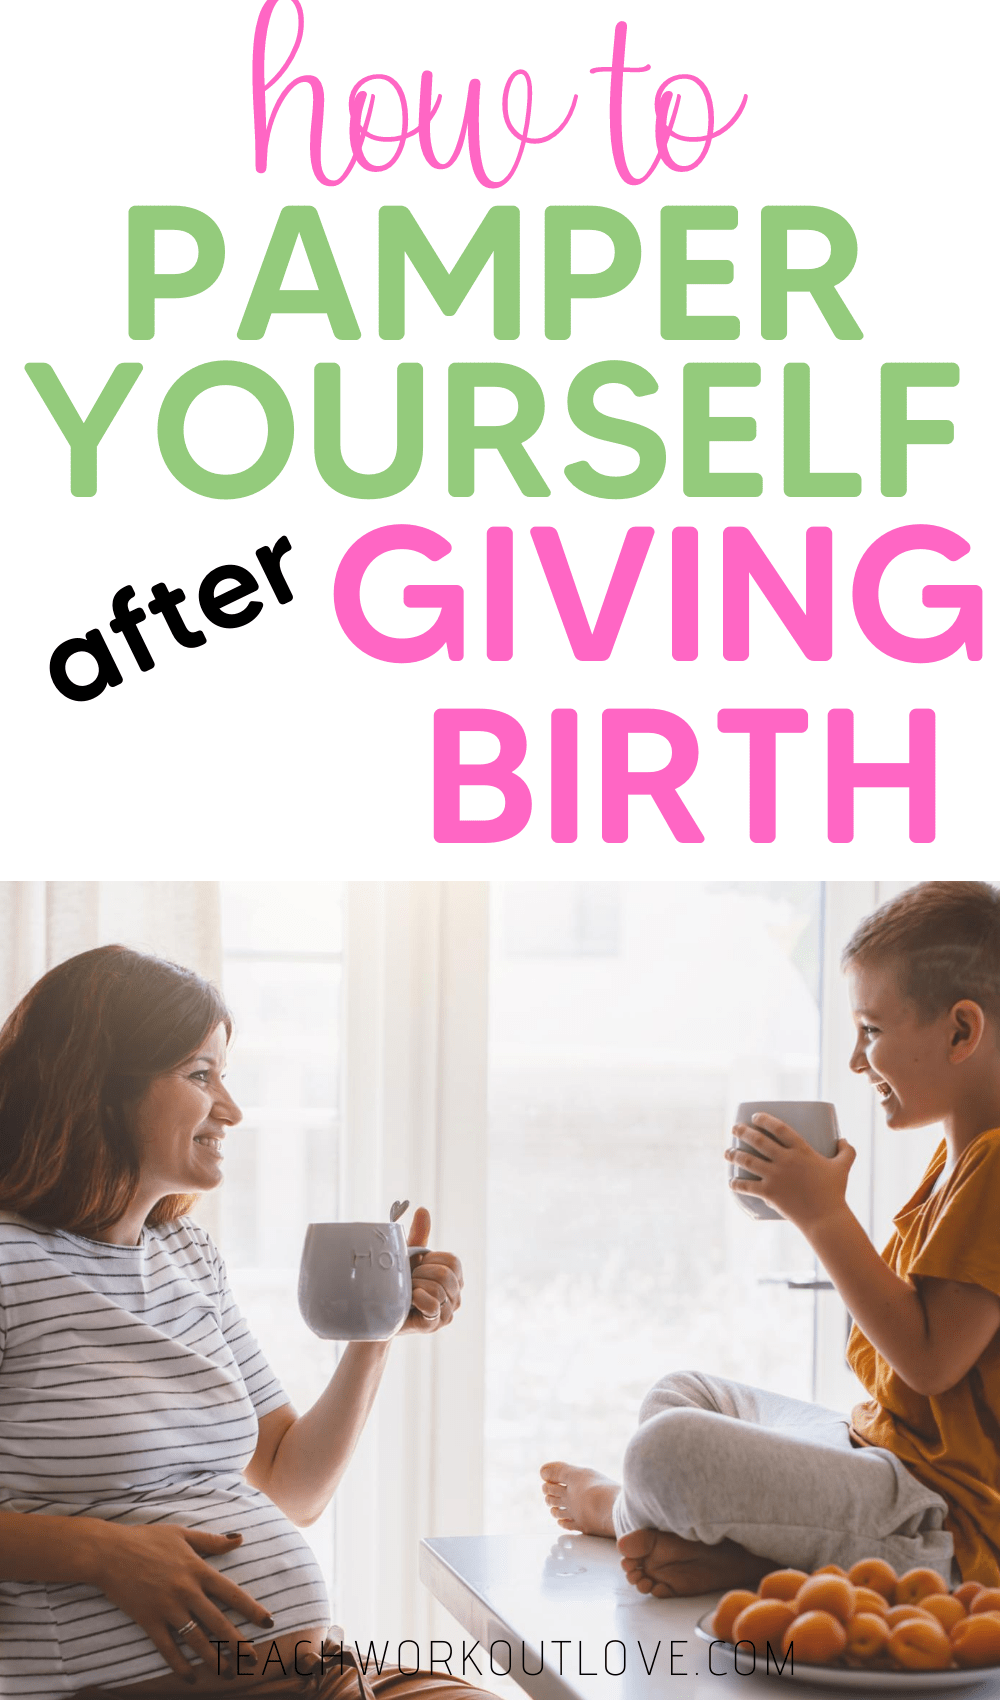 Pamper yourself after giving birth isn't an easy task especially when it's your first child. Here are some tips about how to pamper yourself.